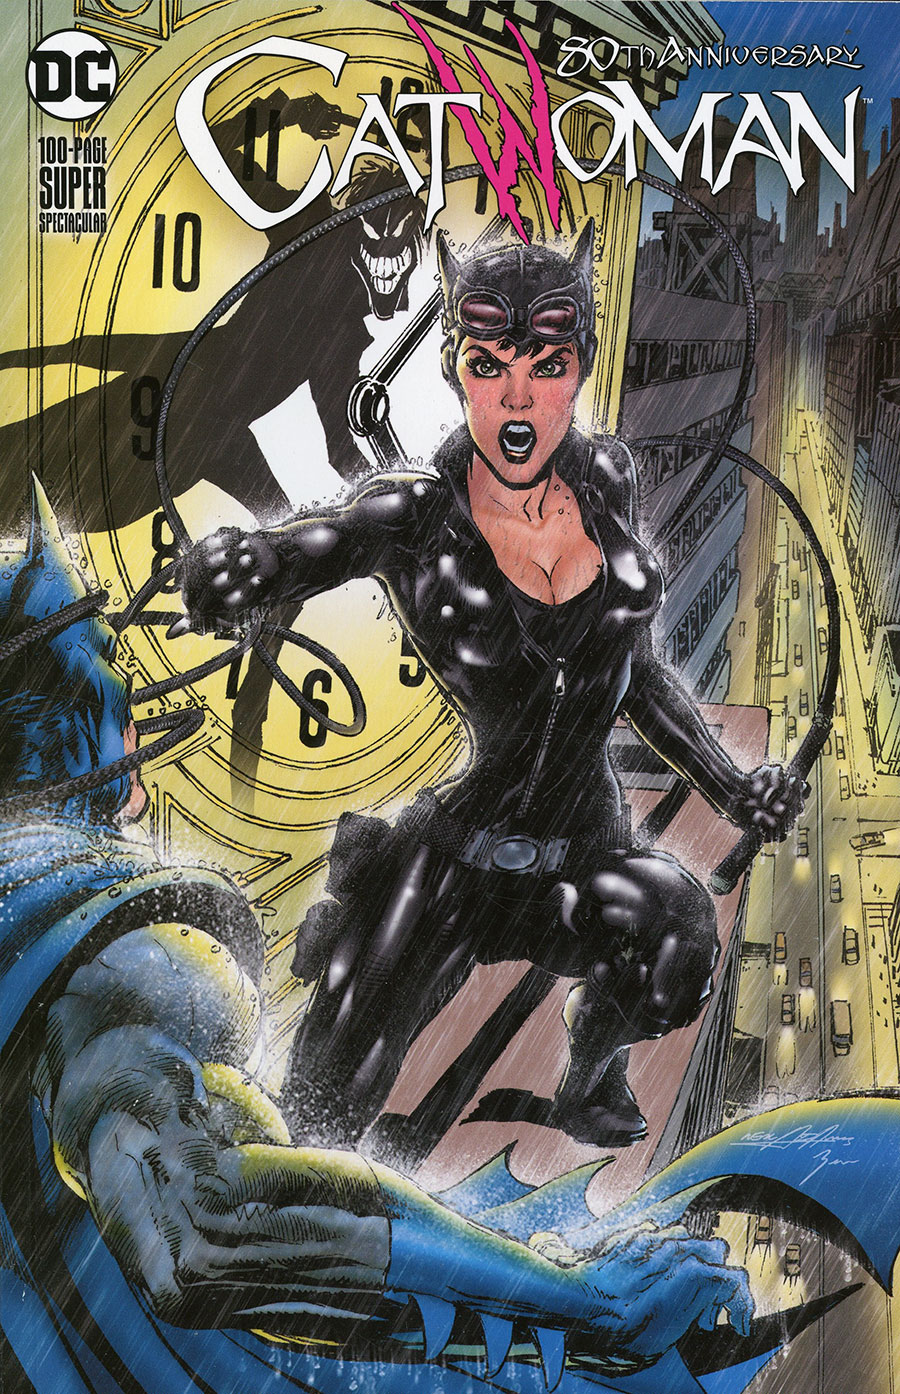 Catwoman 80th Anniversary 100-Page Super Spectacular #1 Cover M Neal Adams Store Exclusive Neal Adams Variant Cover